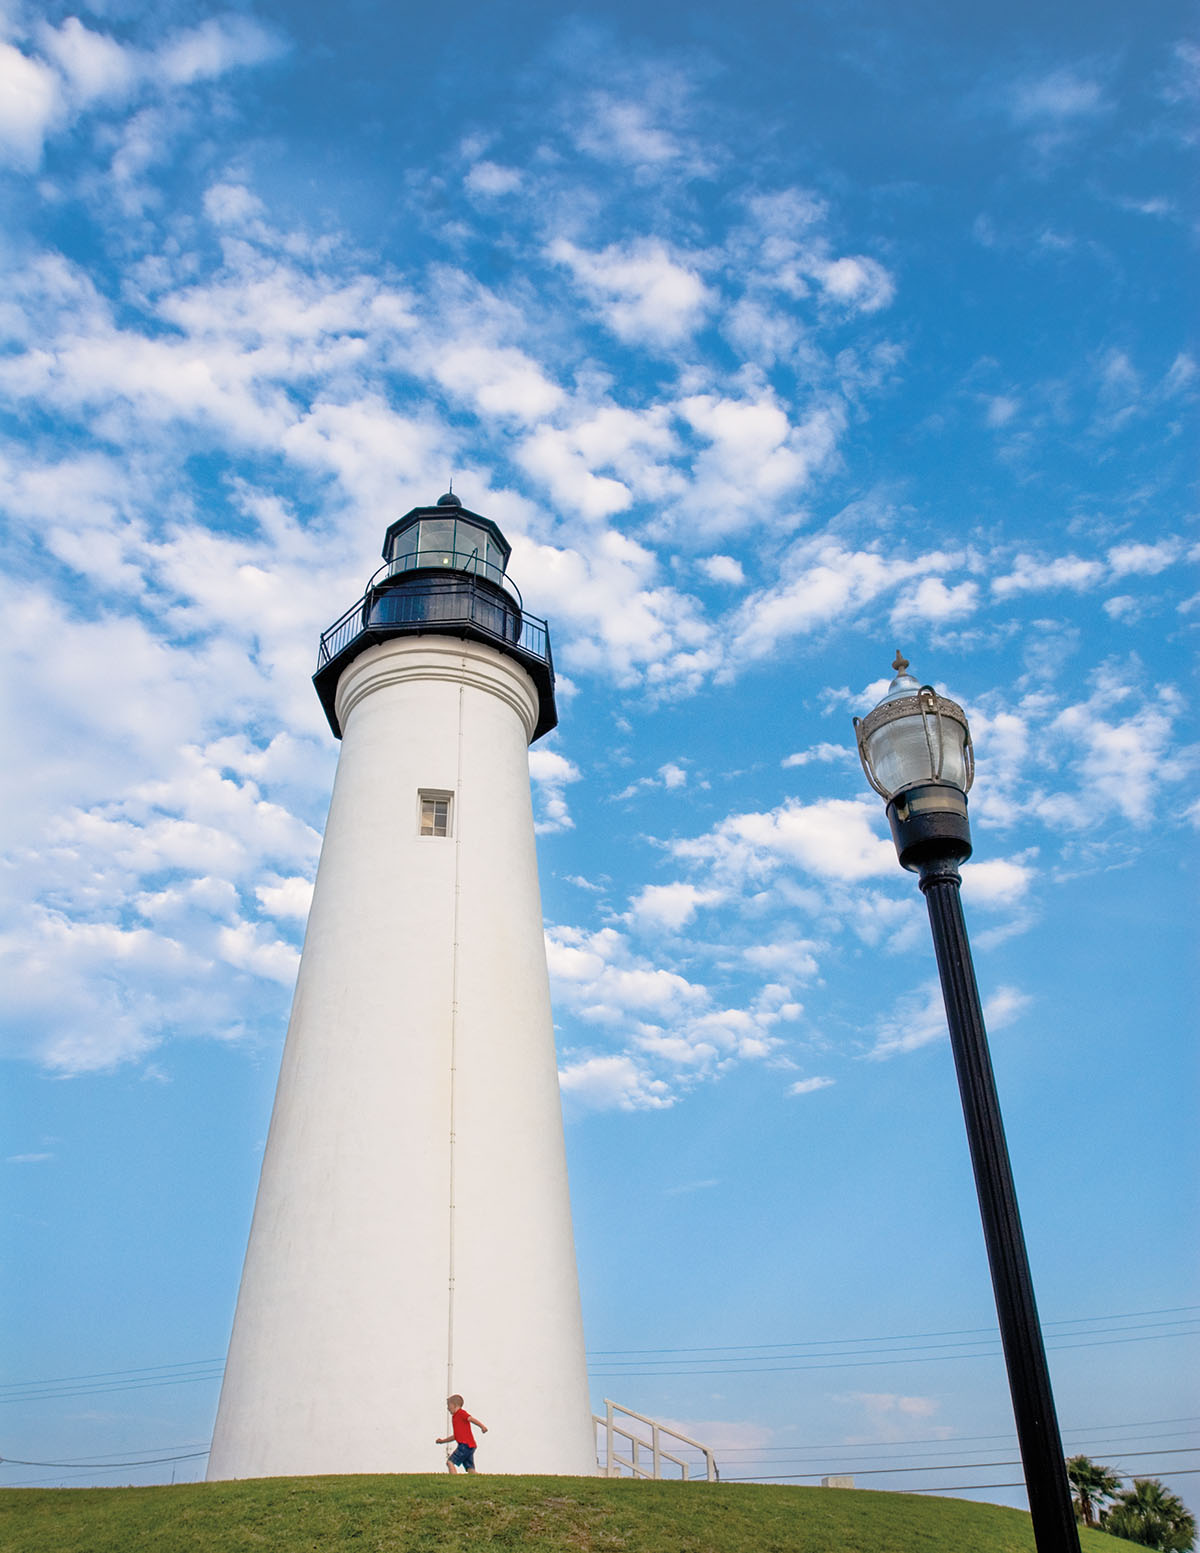 A tall white lighthouse next to a thin black light post in front of a blue sky with scattered clouds